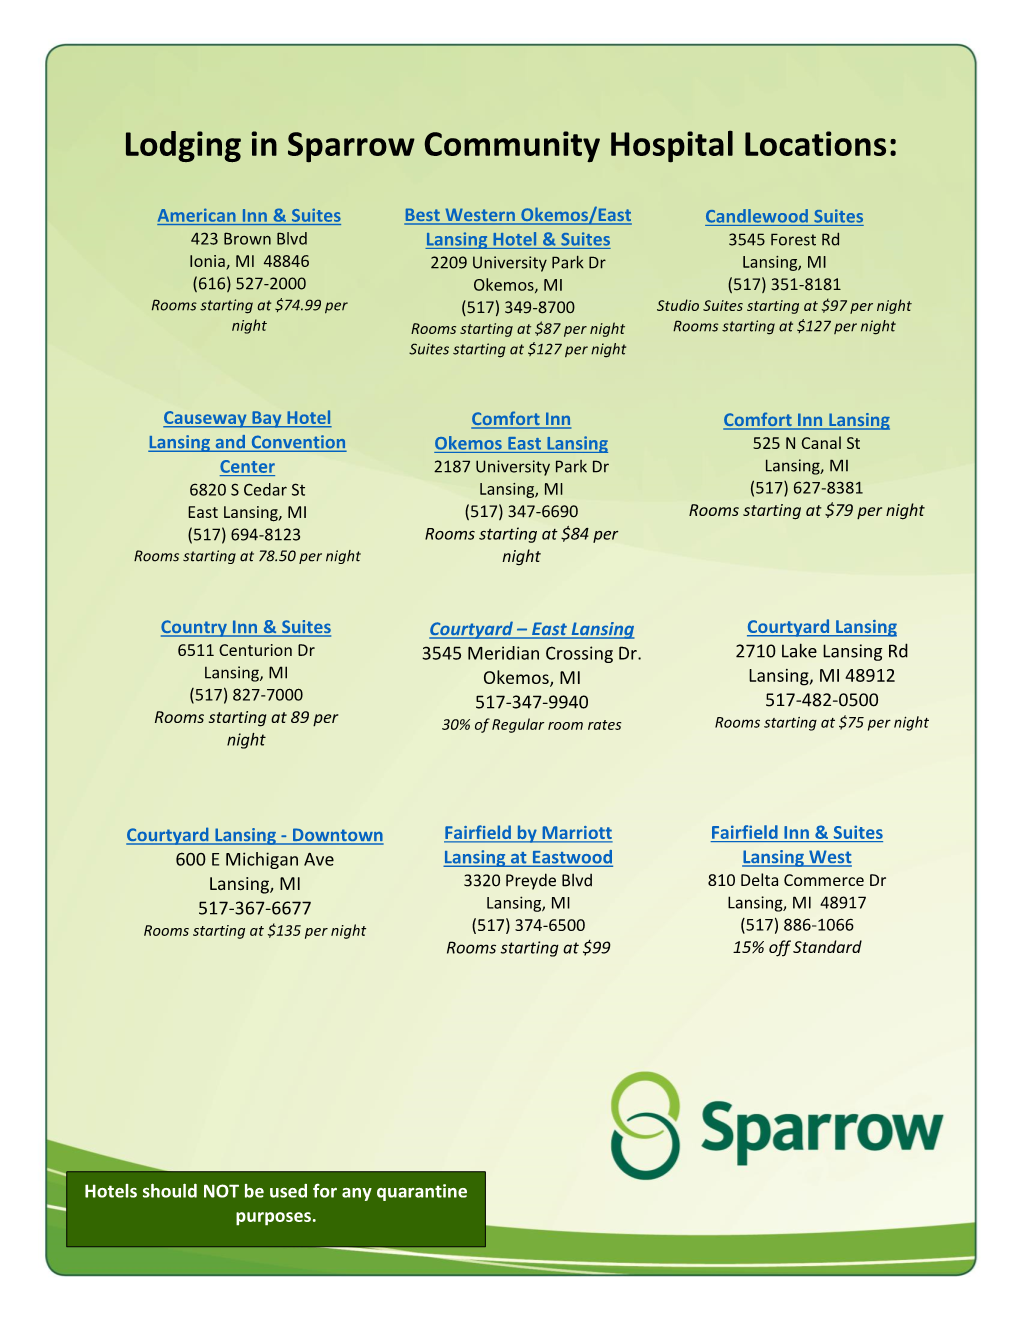 Lodging in Sparrow Community Hospital Locations